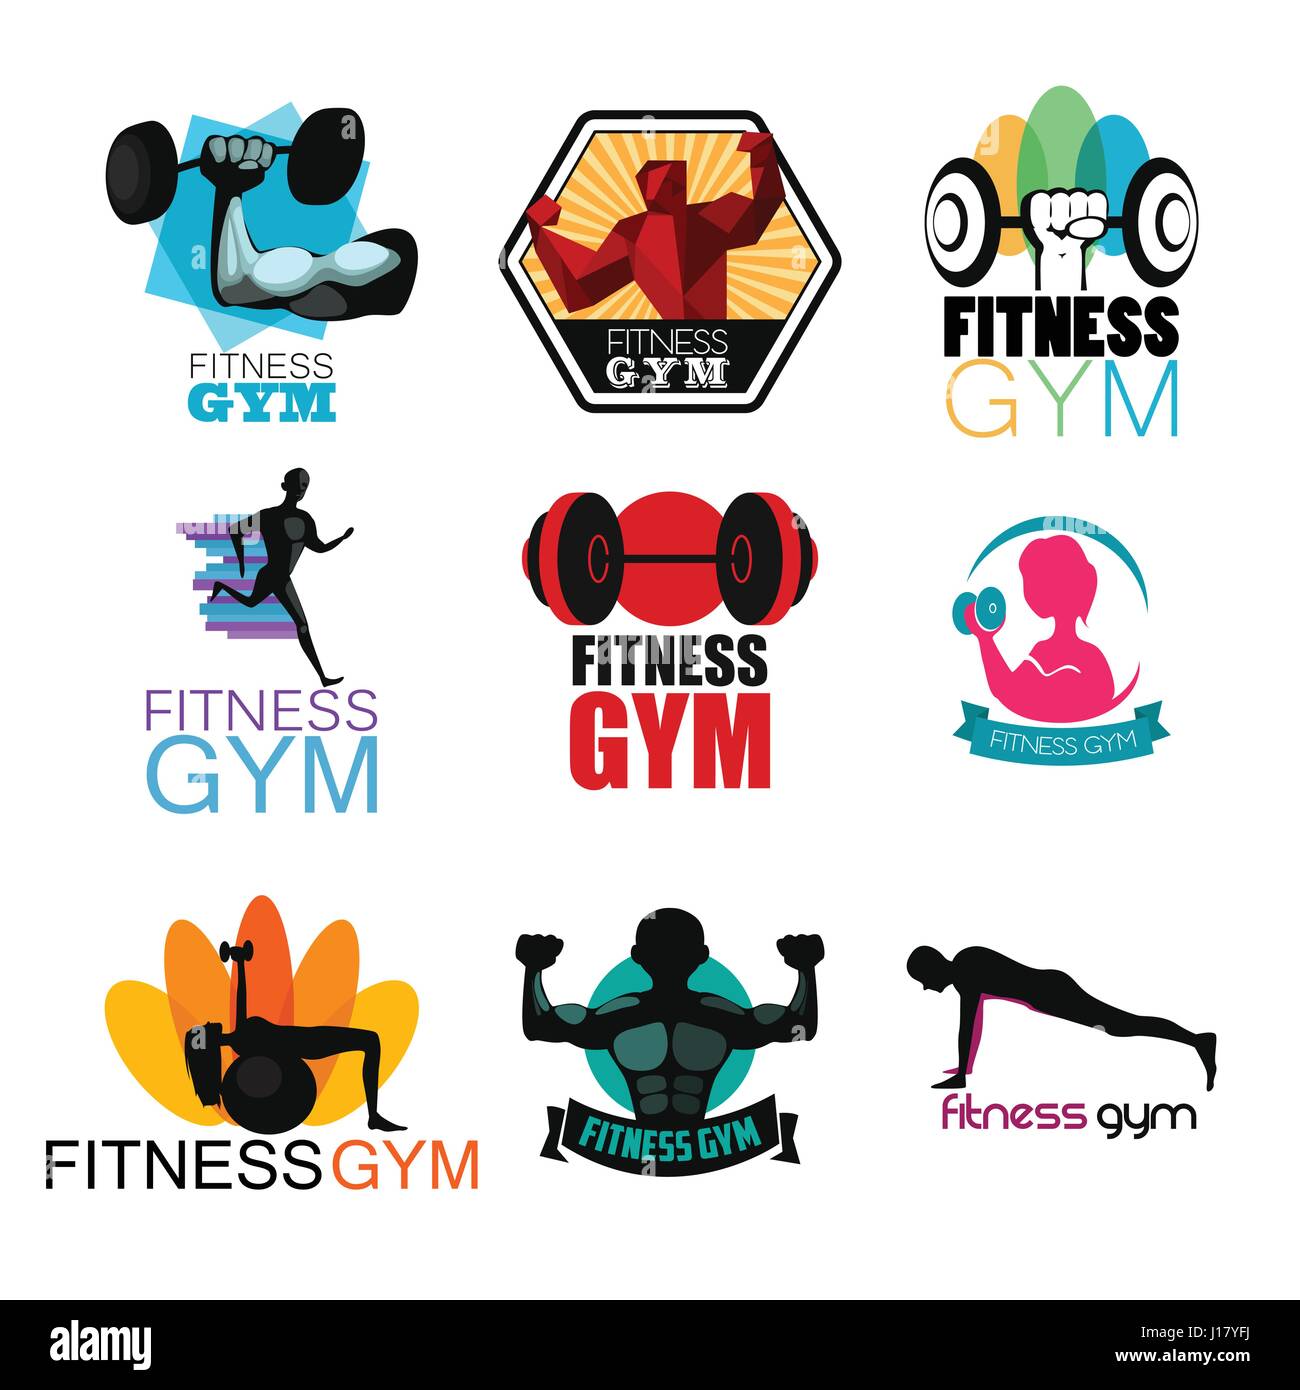 A vector illustration of Fitness Gym Logos Stock Vector